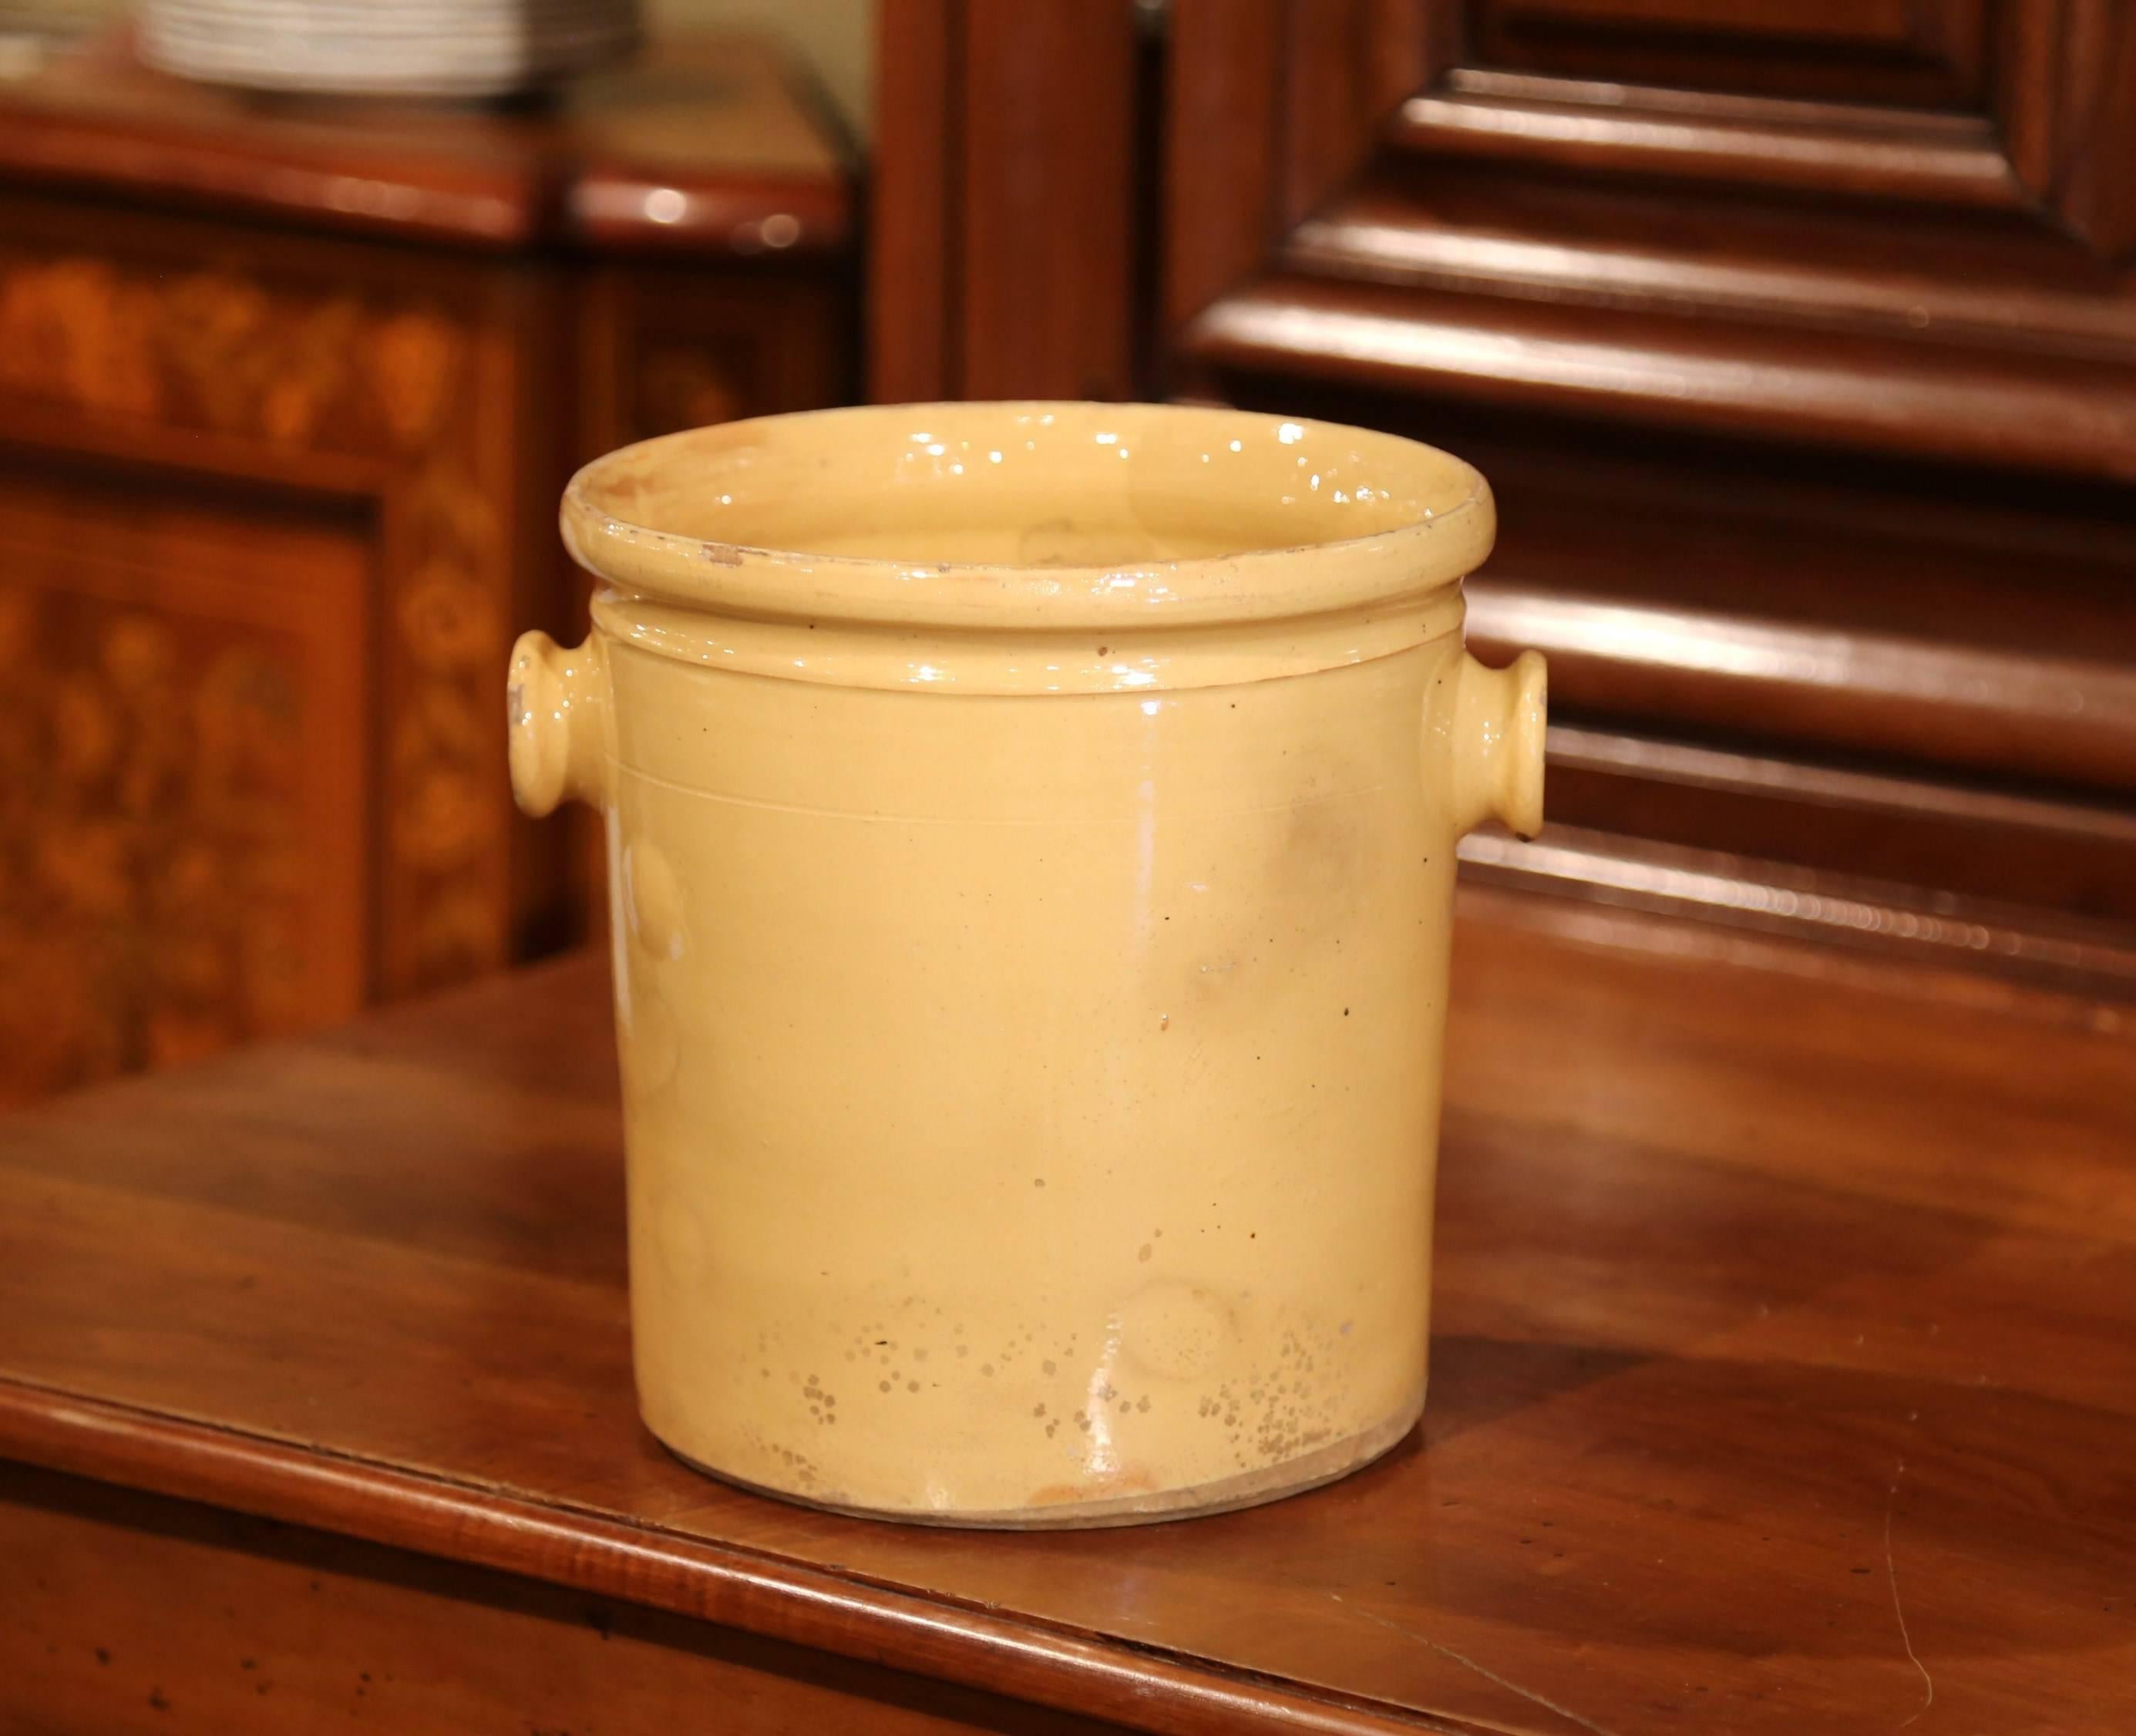 Place your kitchen utensils in this antique porcelain pot from Provence. Crafted in Southern France, circa 1860, the ceramic pot has a circular shape and simple design. The vase has a yellow glaze and a small round handle on both sides. The